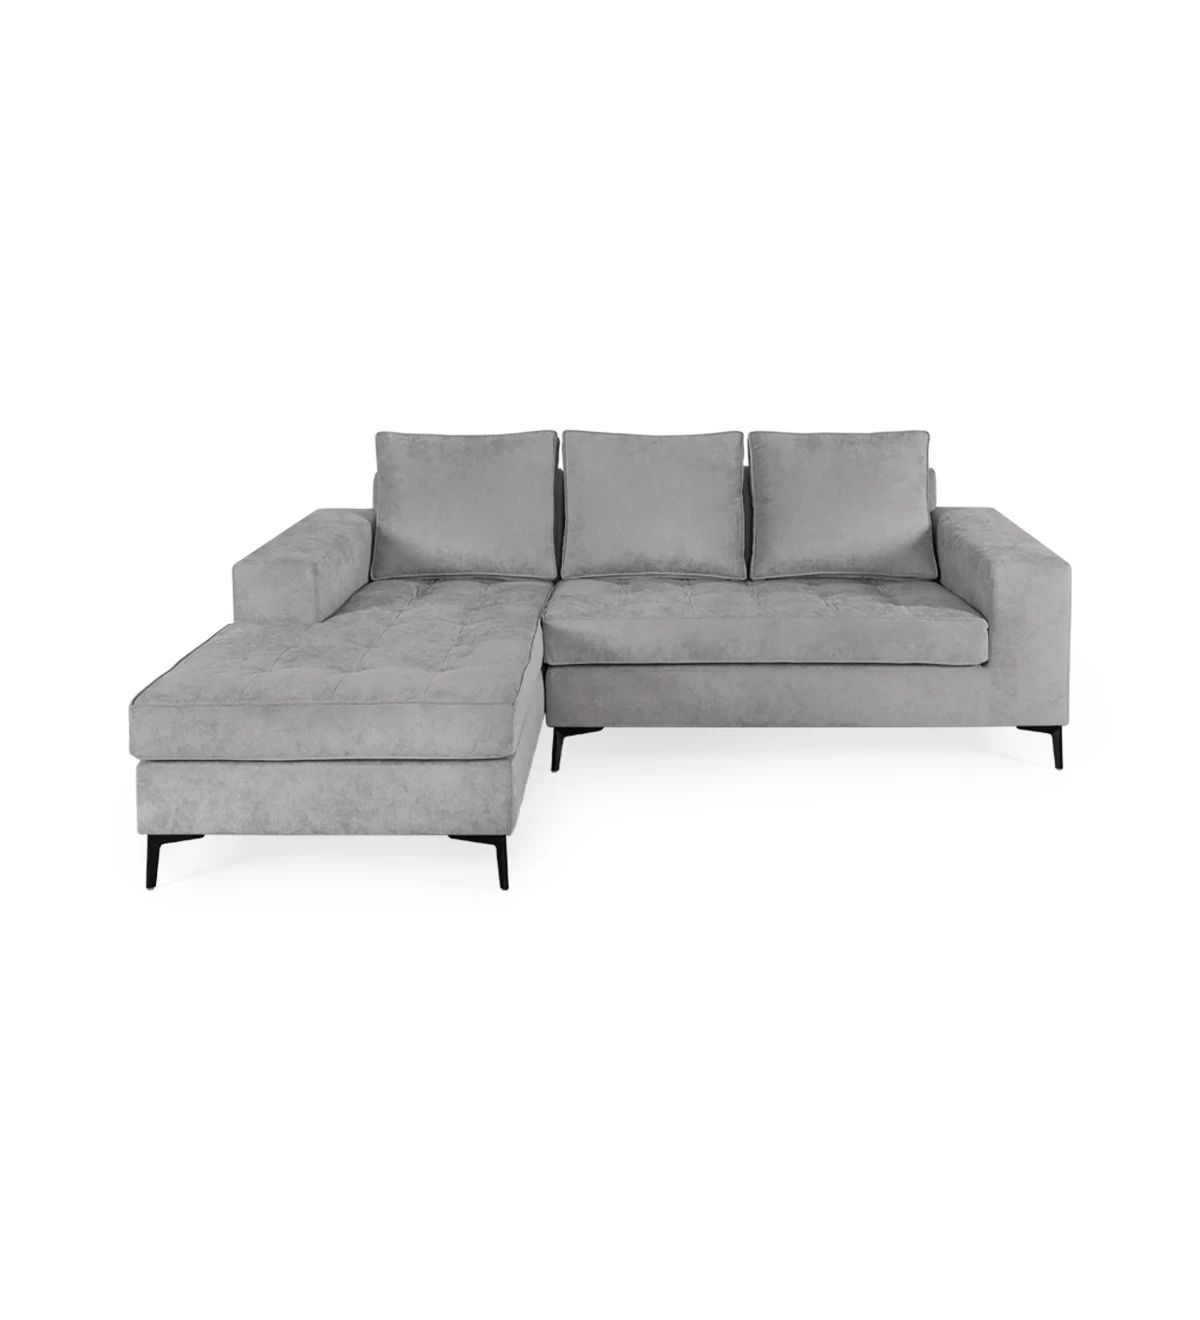 2 seater sofa with chaise longue. Upholstered in fabric, with black lacquered metal feet. 